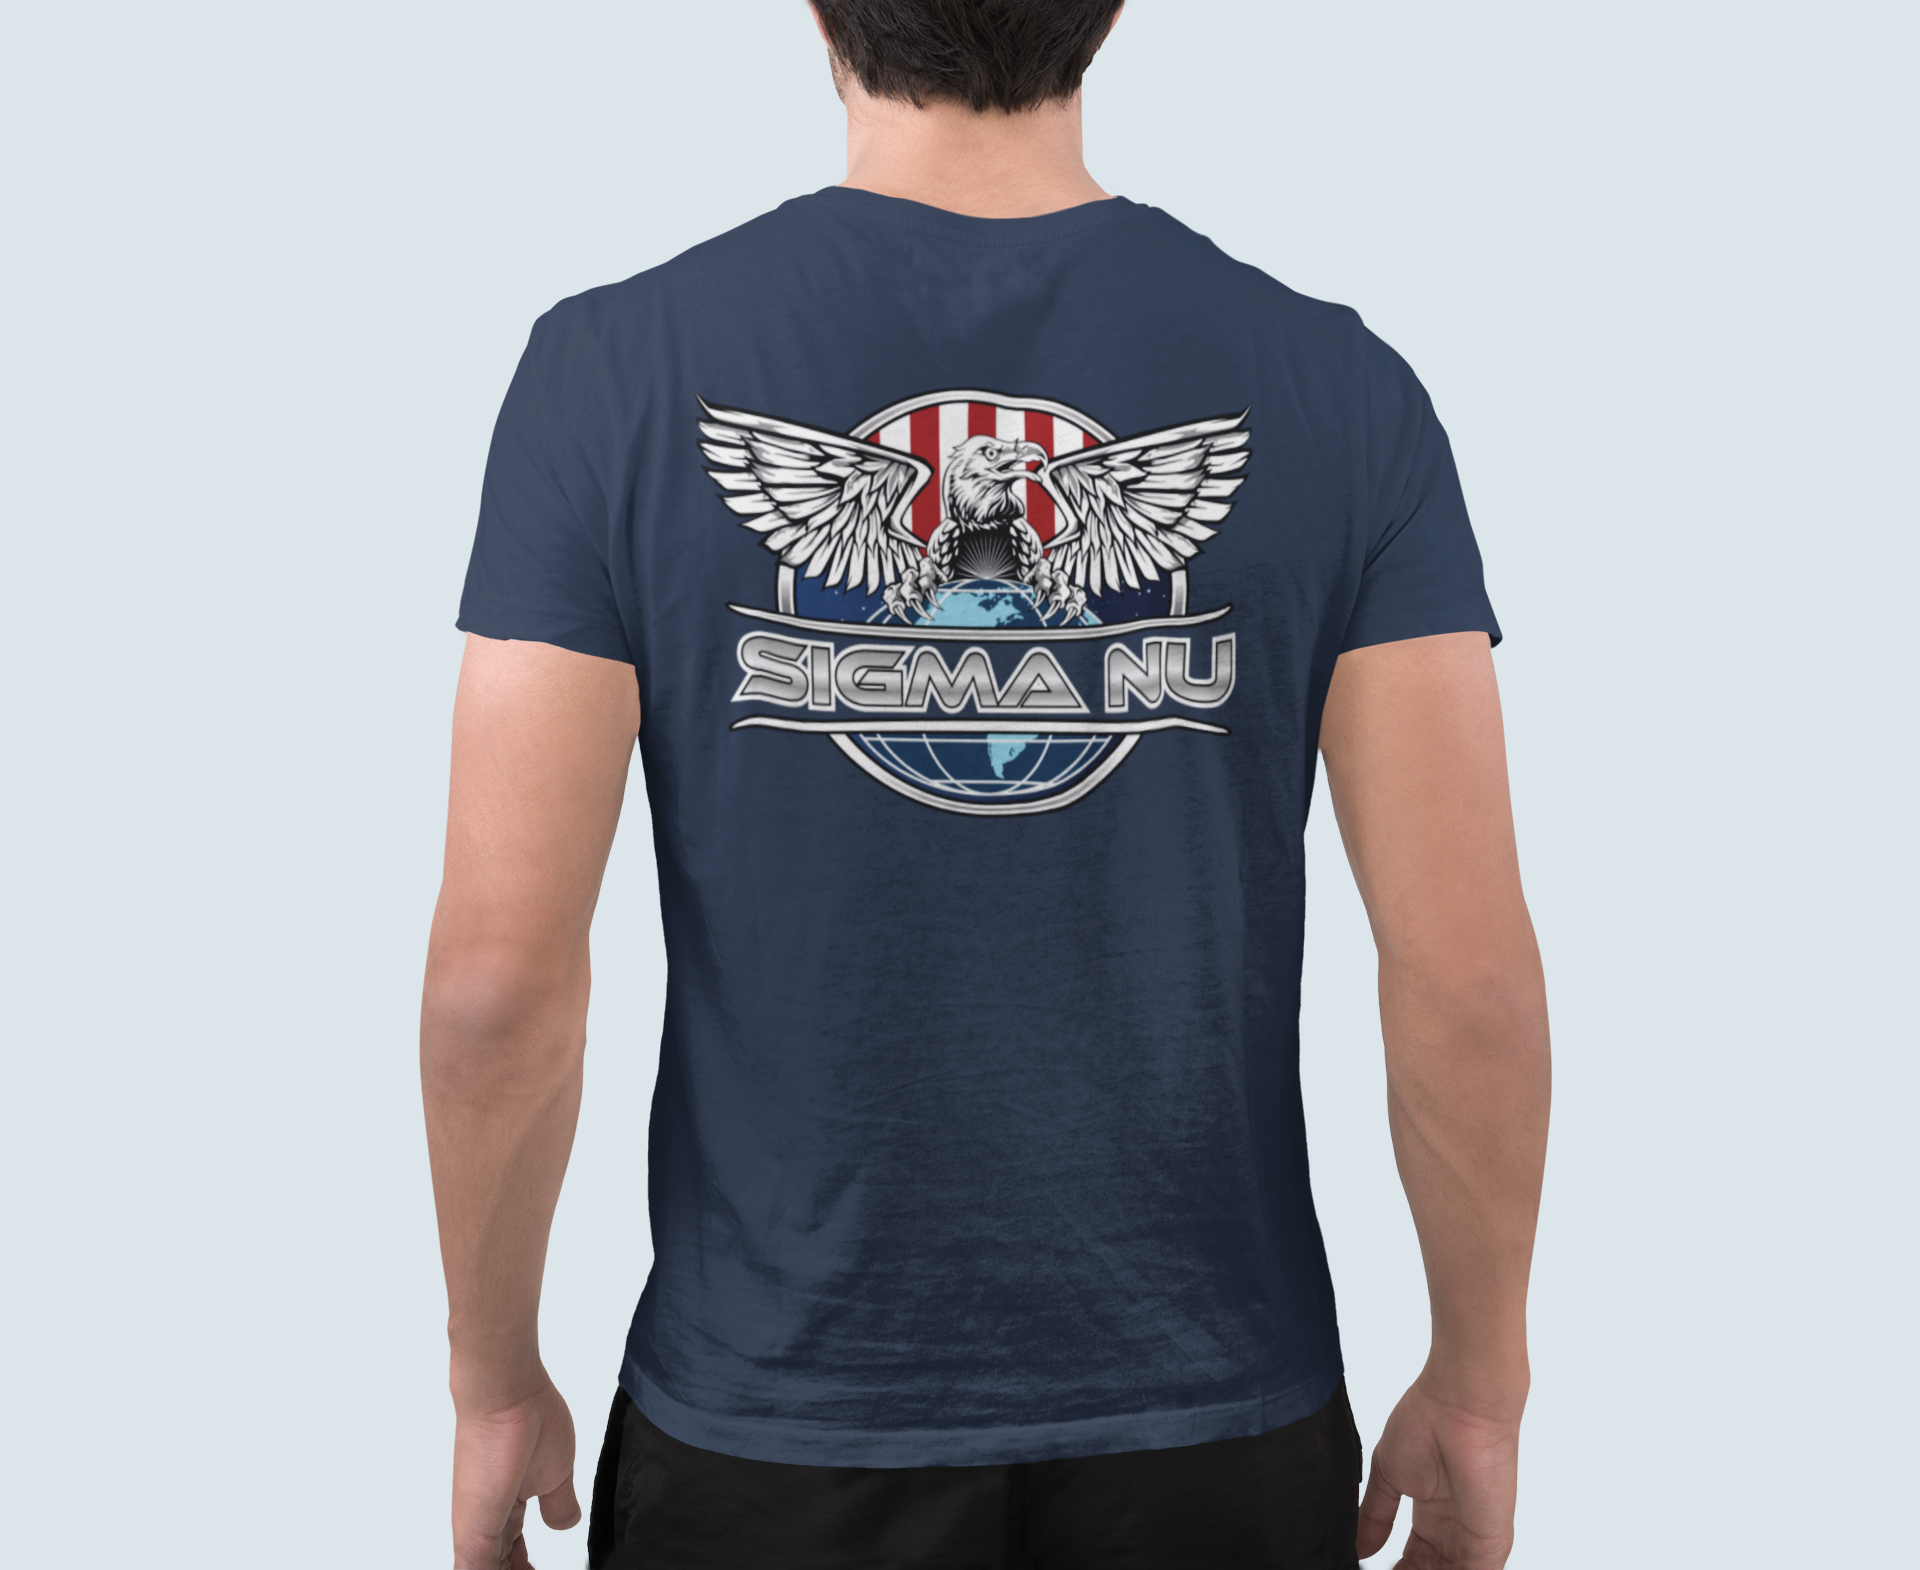 Navy Sigma Nu Graphic T-Shirt | The Fraternal Order |Sigma Nu Clothing, Apparel and Merchandise model 